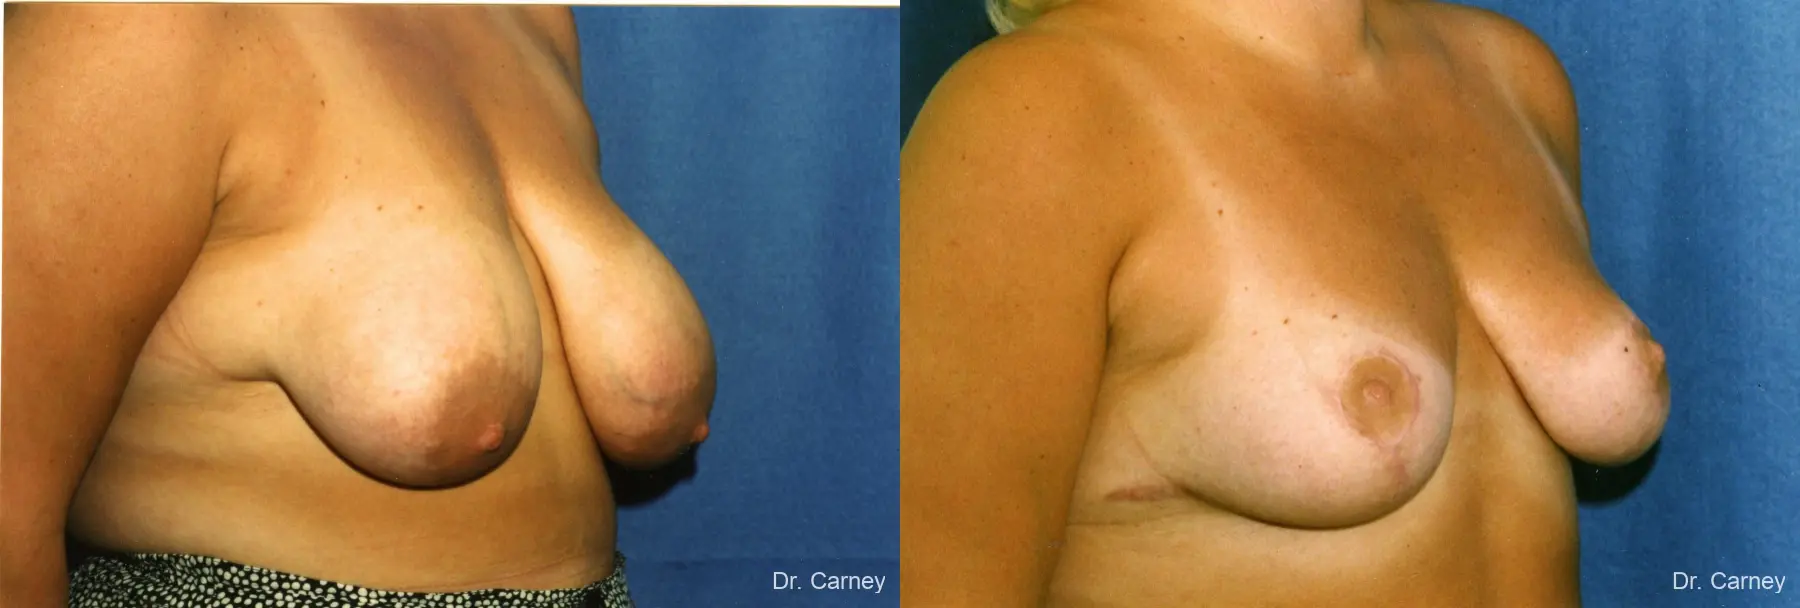 Virginia Beach Breast Lift 1190 - Before and After